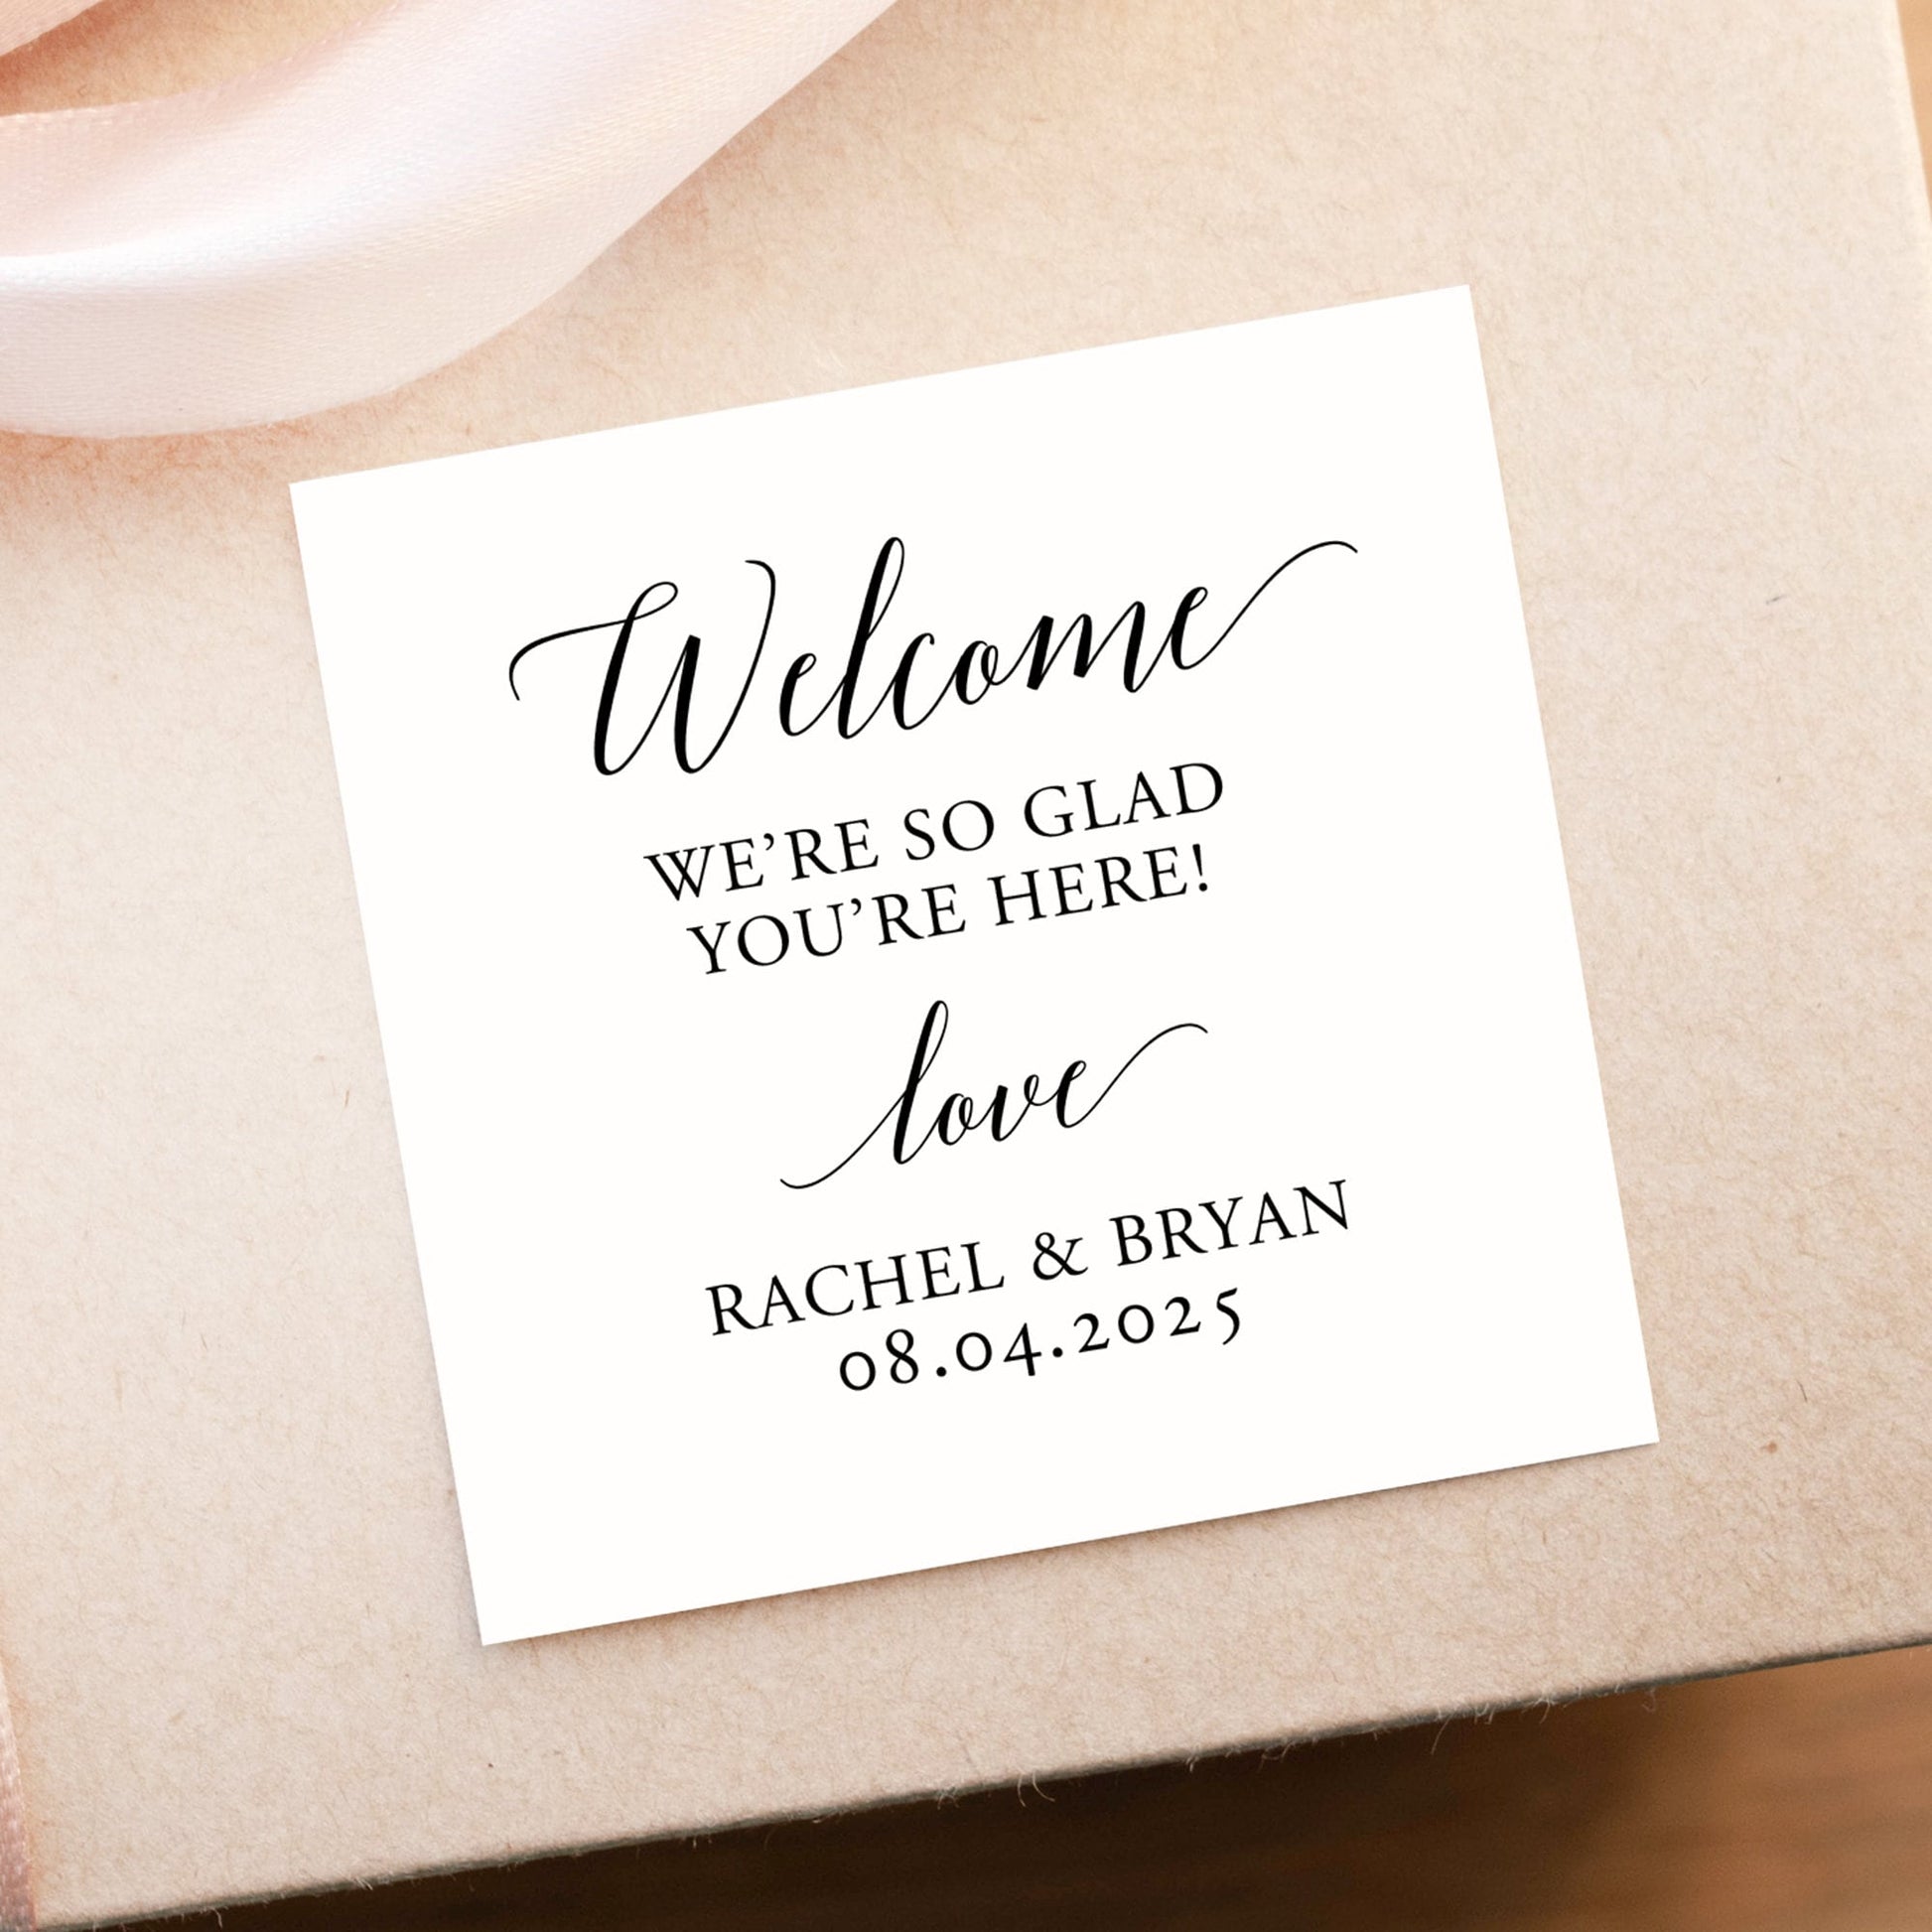 Welcome Bag Note - Personalized Weddings